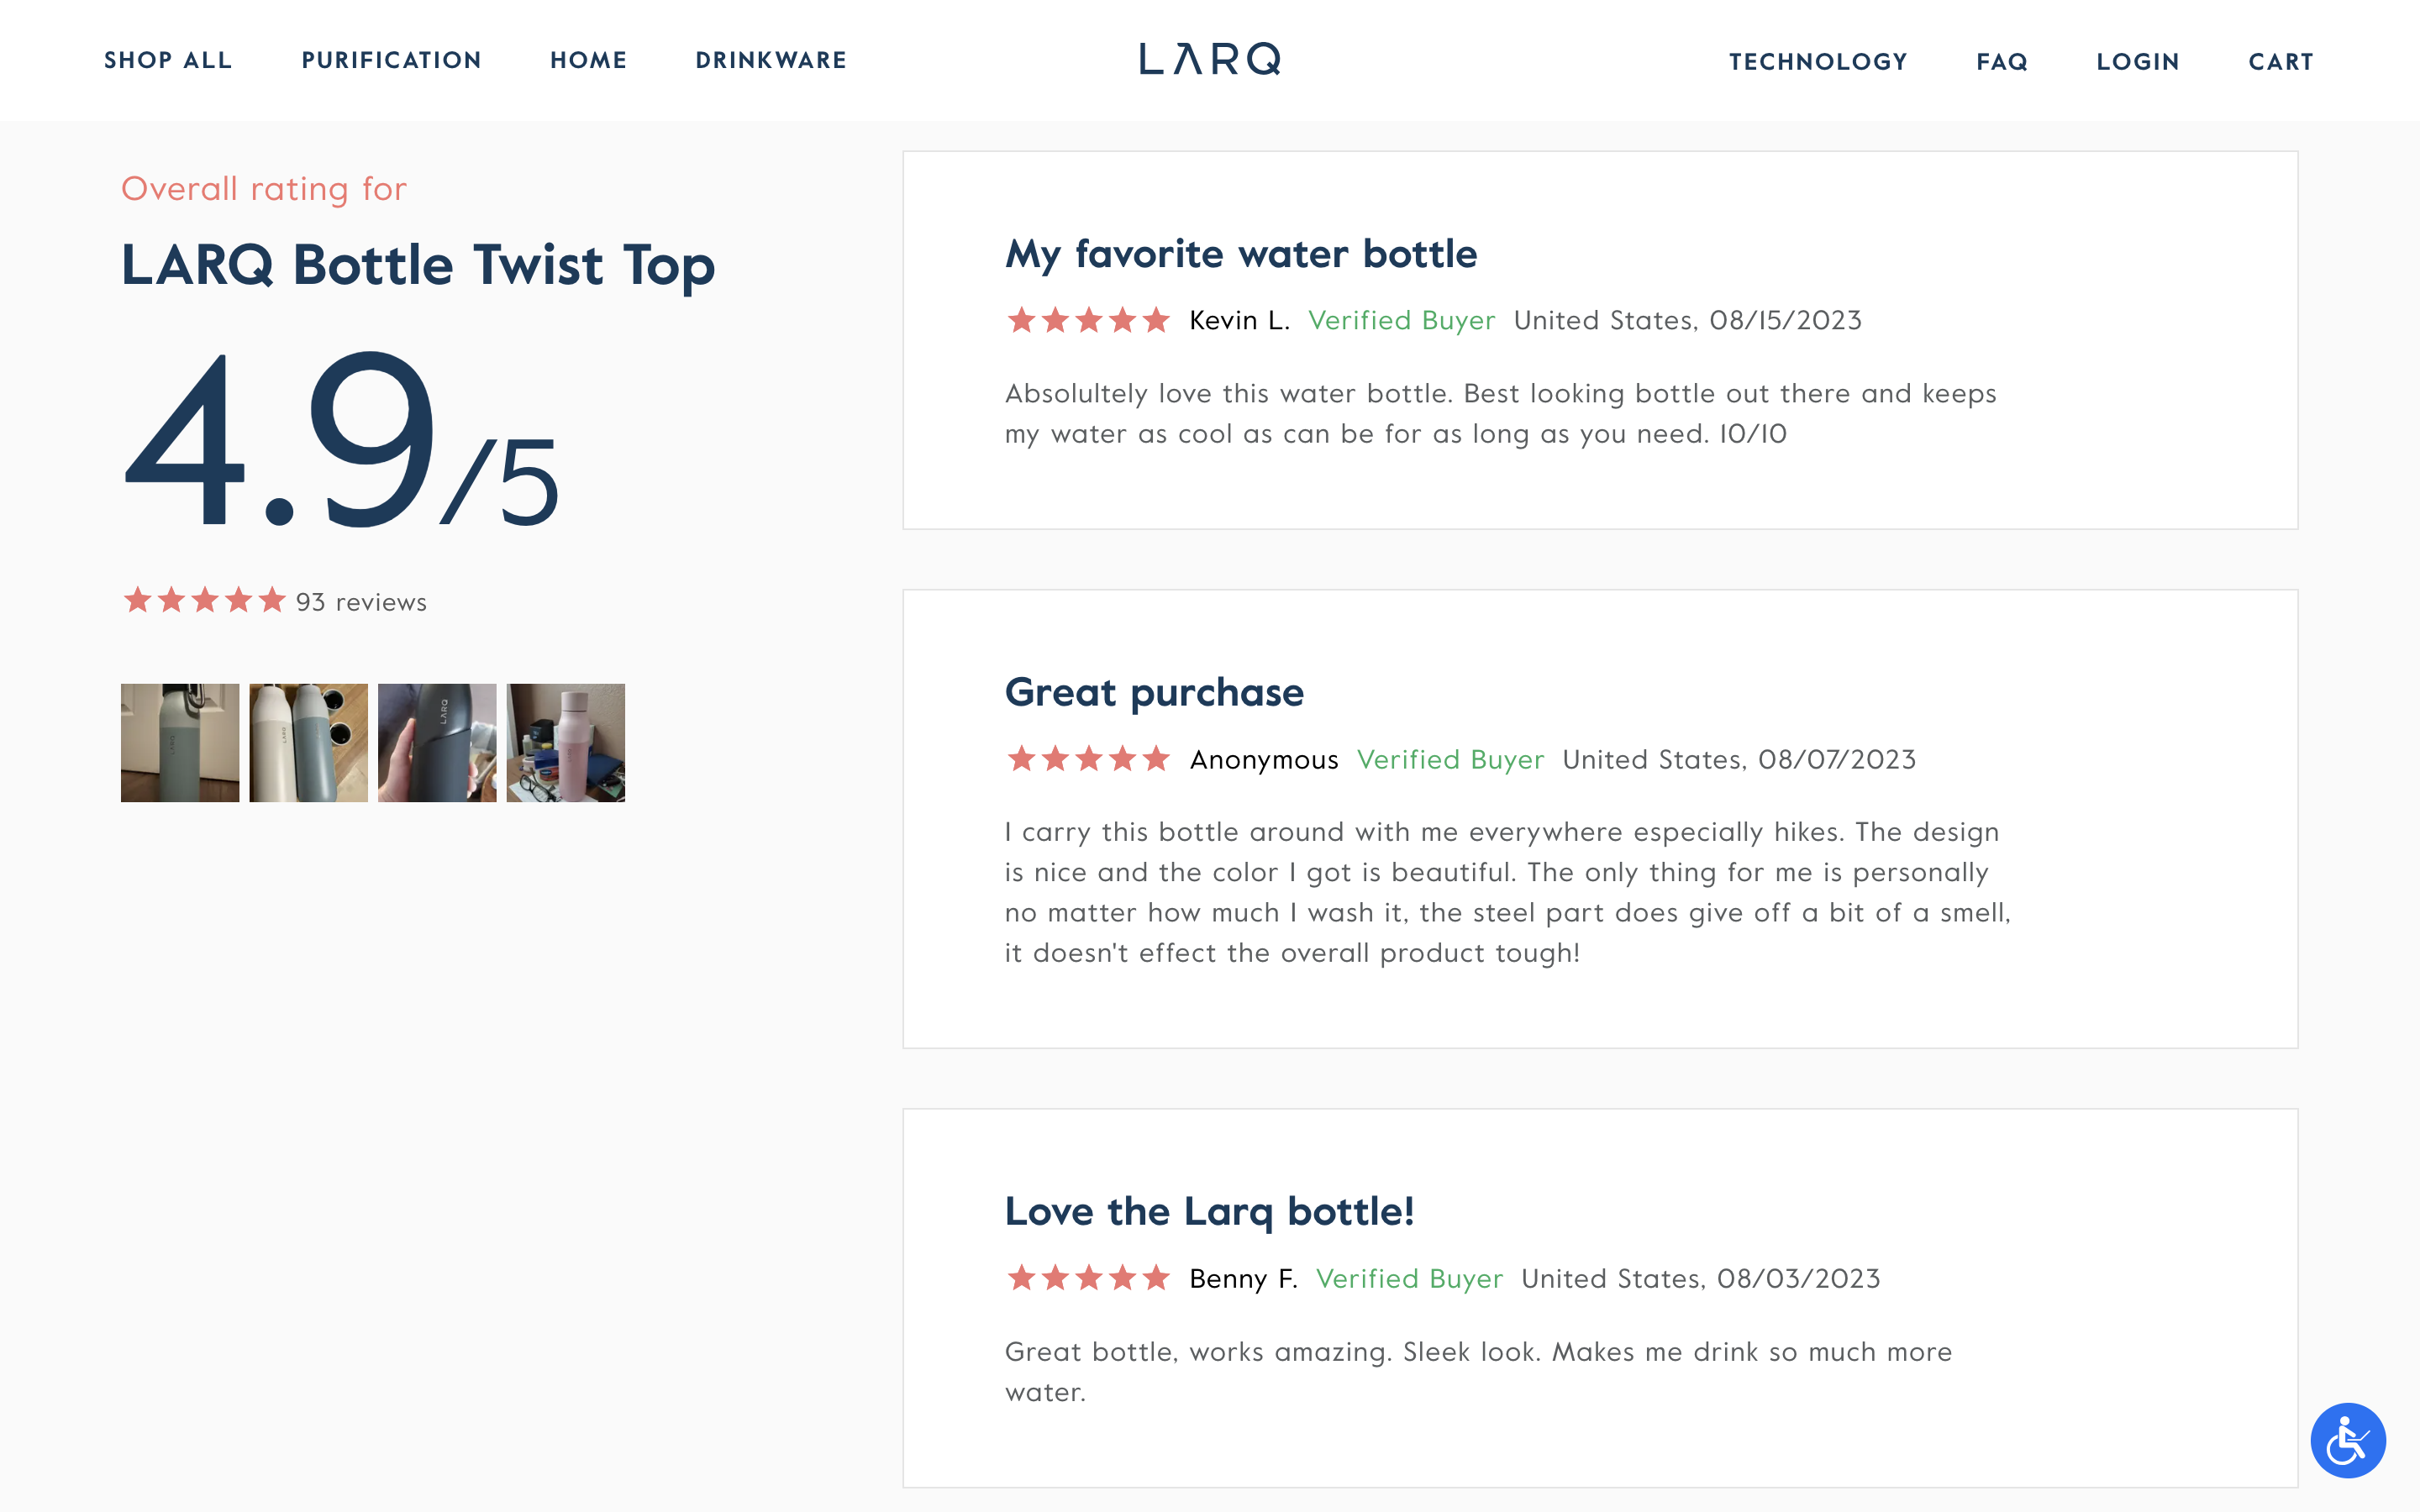 Screenshot of a Larq water bottle product page displaying a 4.9/5 customer rating beside 3 5-star reviews.